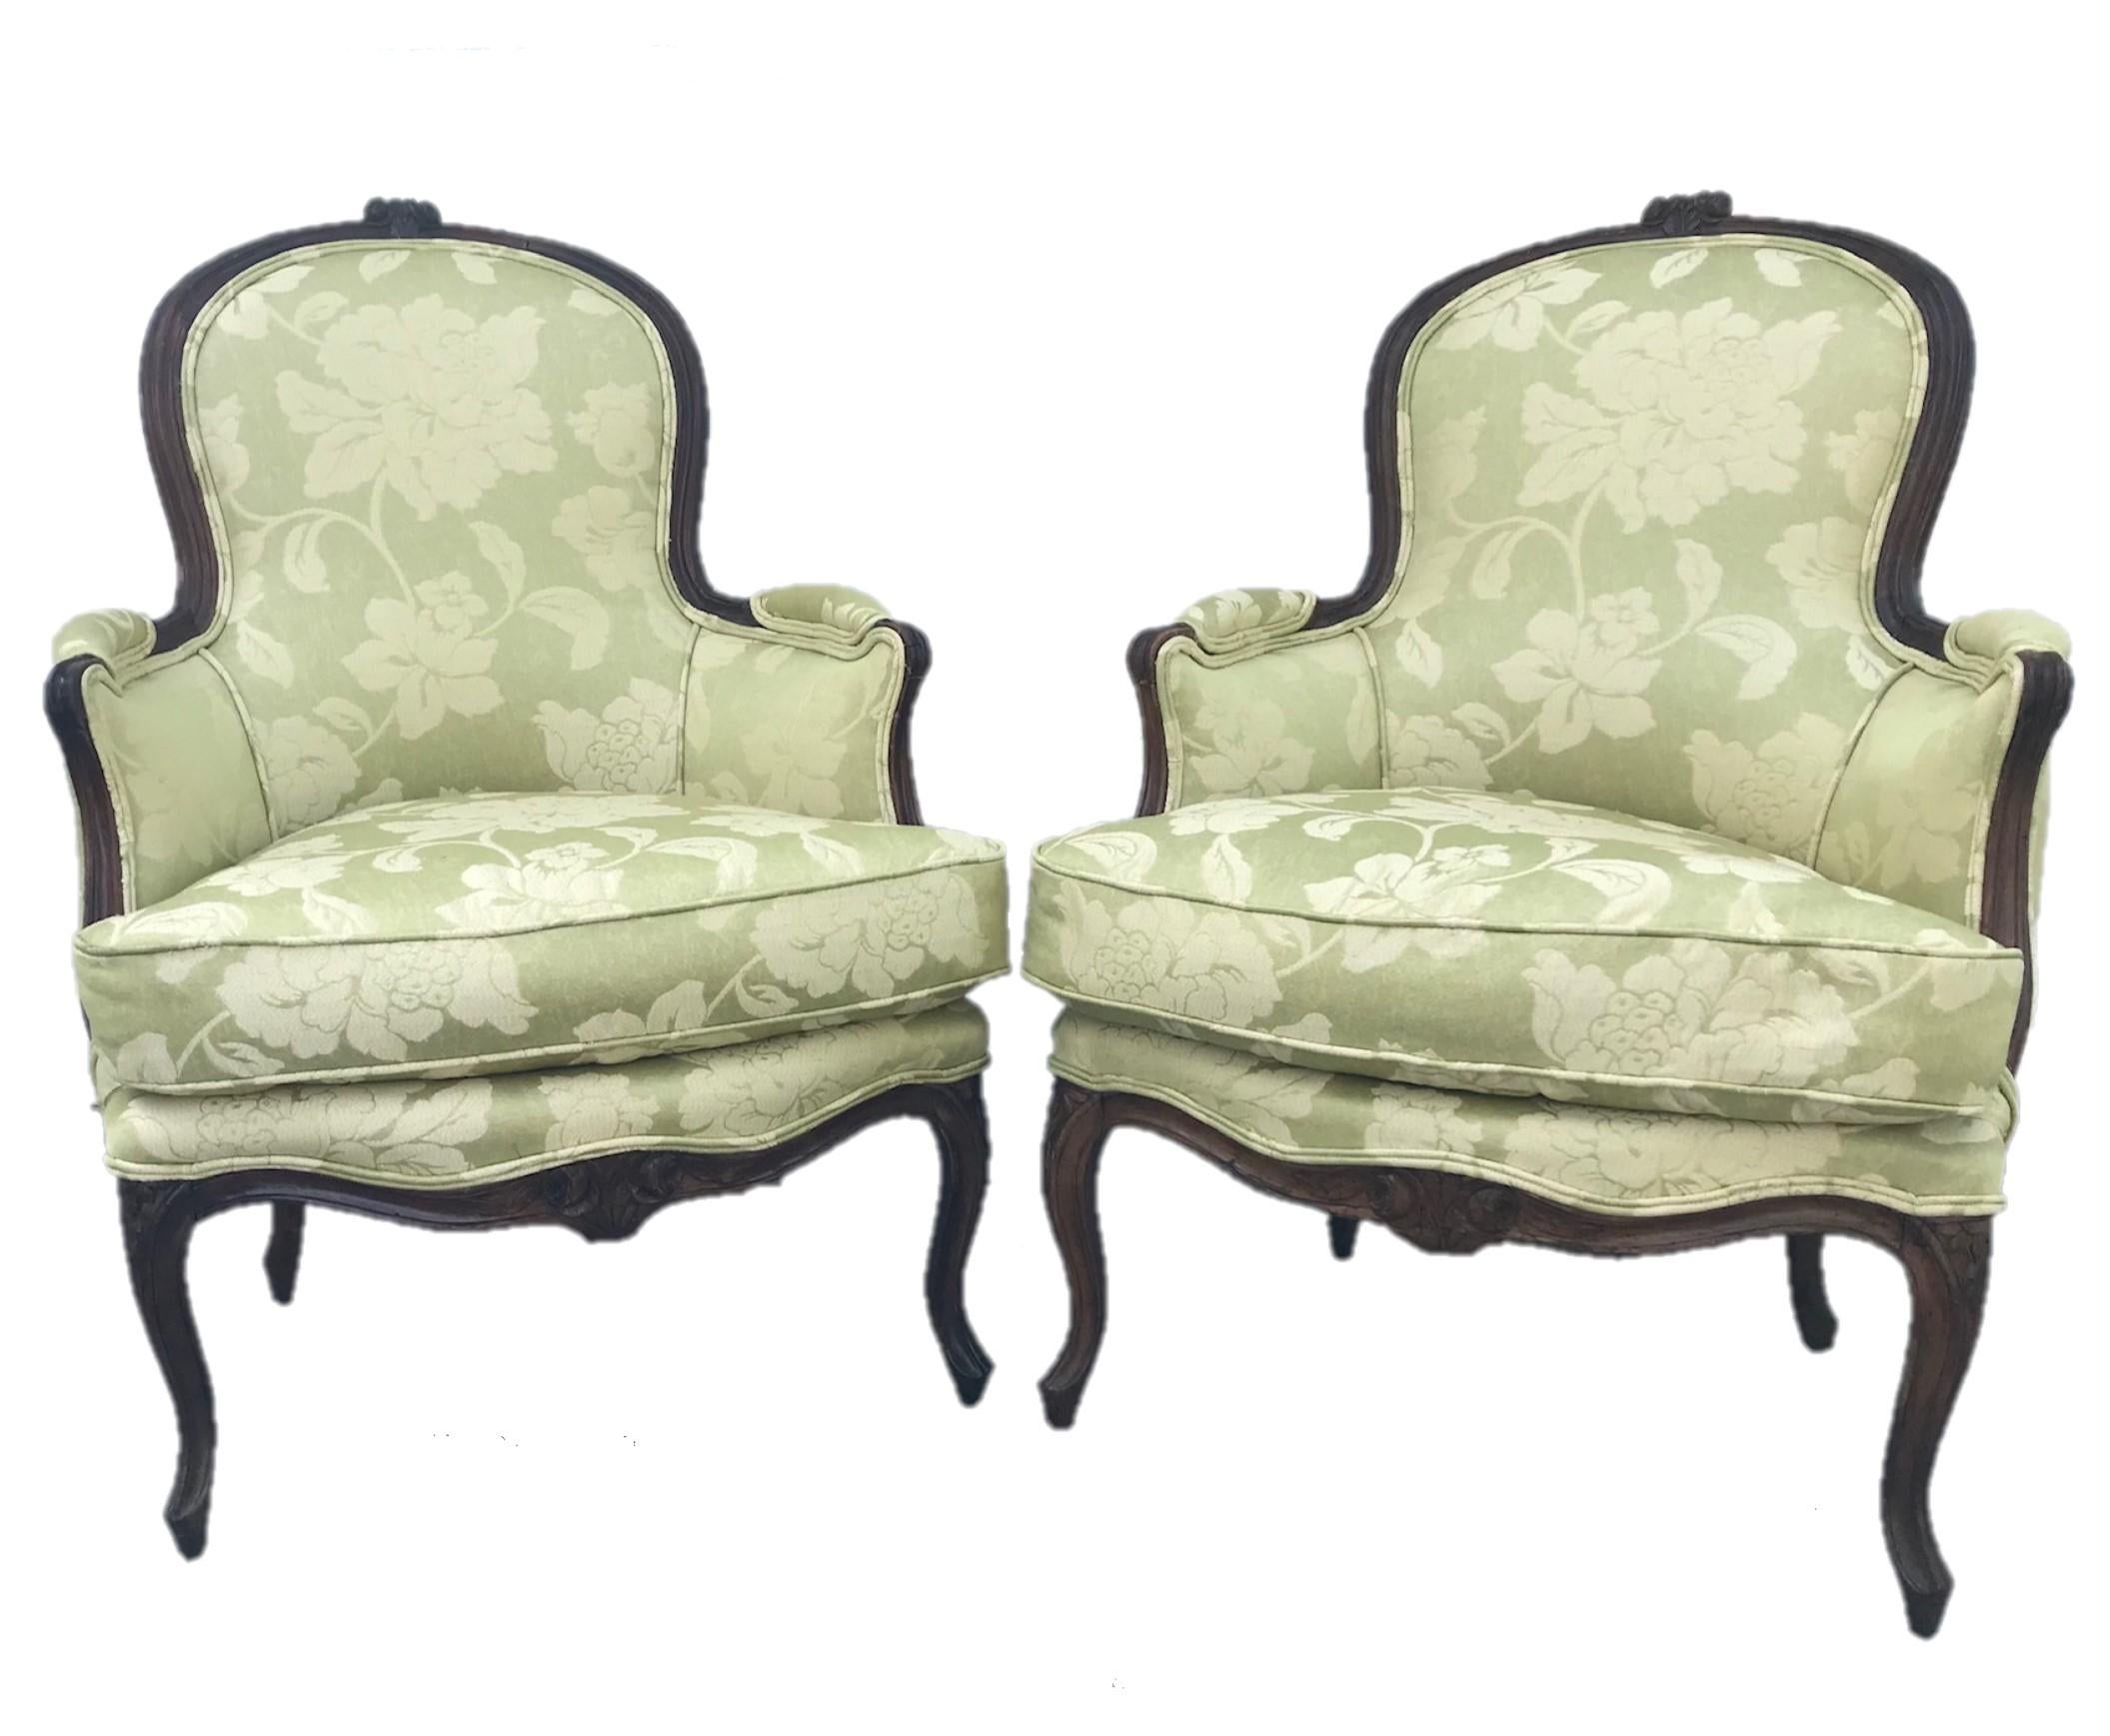 Pair of period French Louis XV carved bergeres cabriolet, Paris, circa 1760.

The regal bergère cabriolet is referred to as the chair of Kings. This pair is finely hand carved in walnut with flowers and intricate mouldings. The bergeres have an